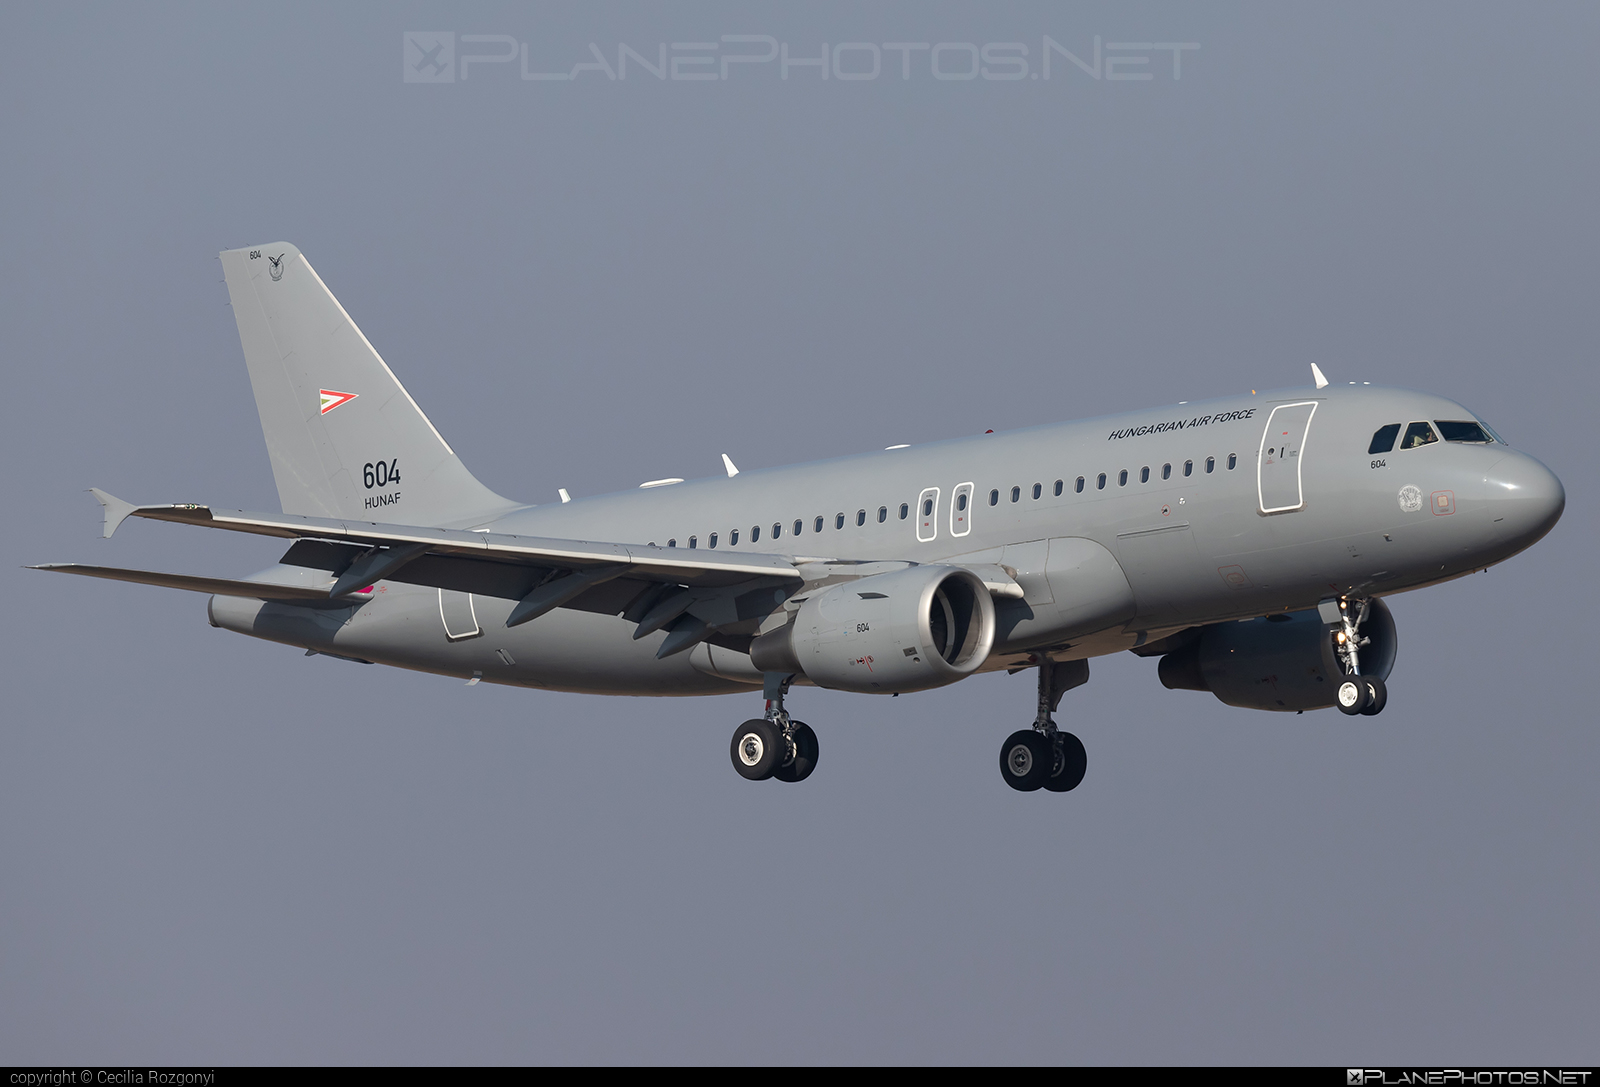 Airbus A319-112 - 604 operated by Magyar Légierő (Hungarian Air Force) #a319 #a320family #airbus #airbus319 #hungarianairforce #magyarlegiero